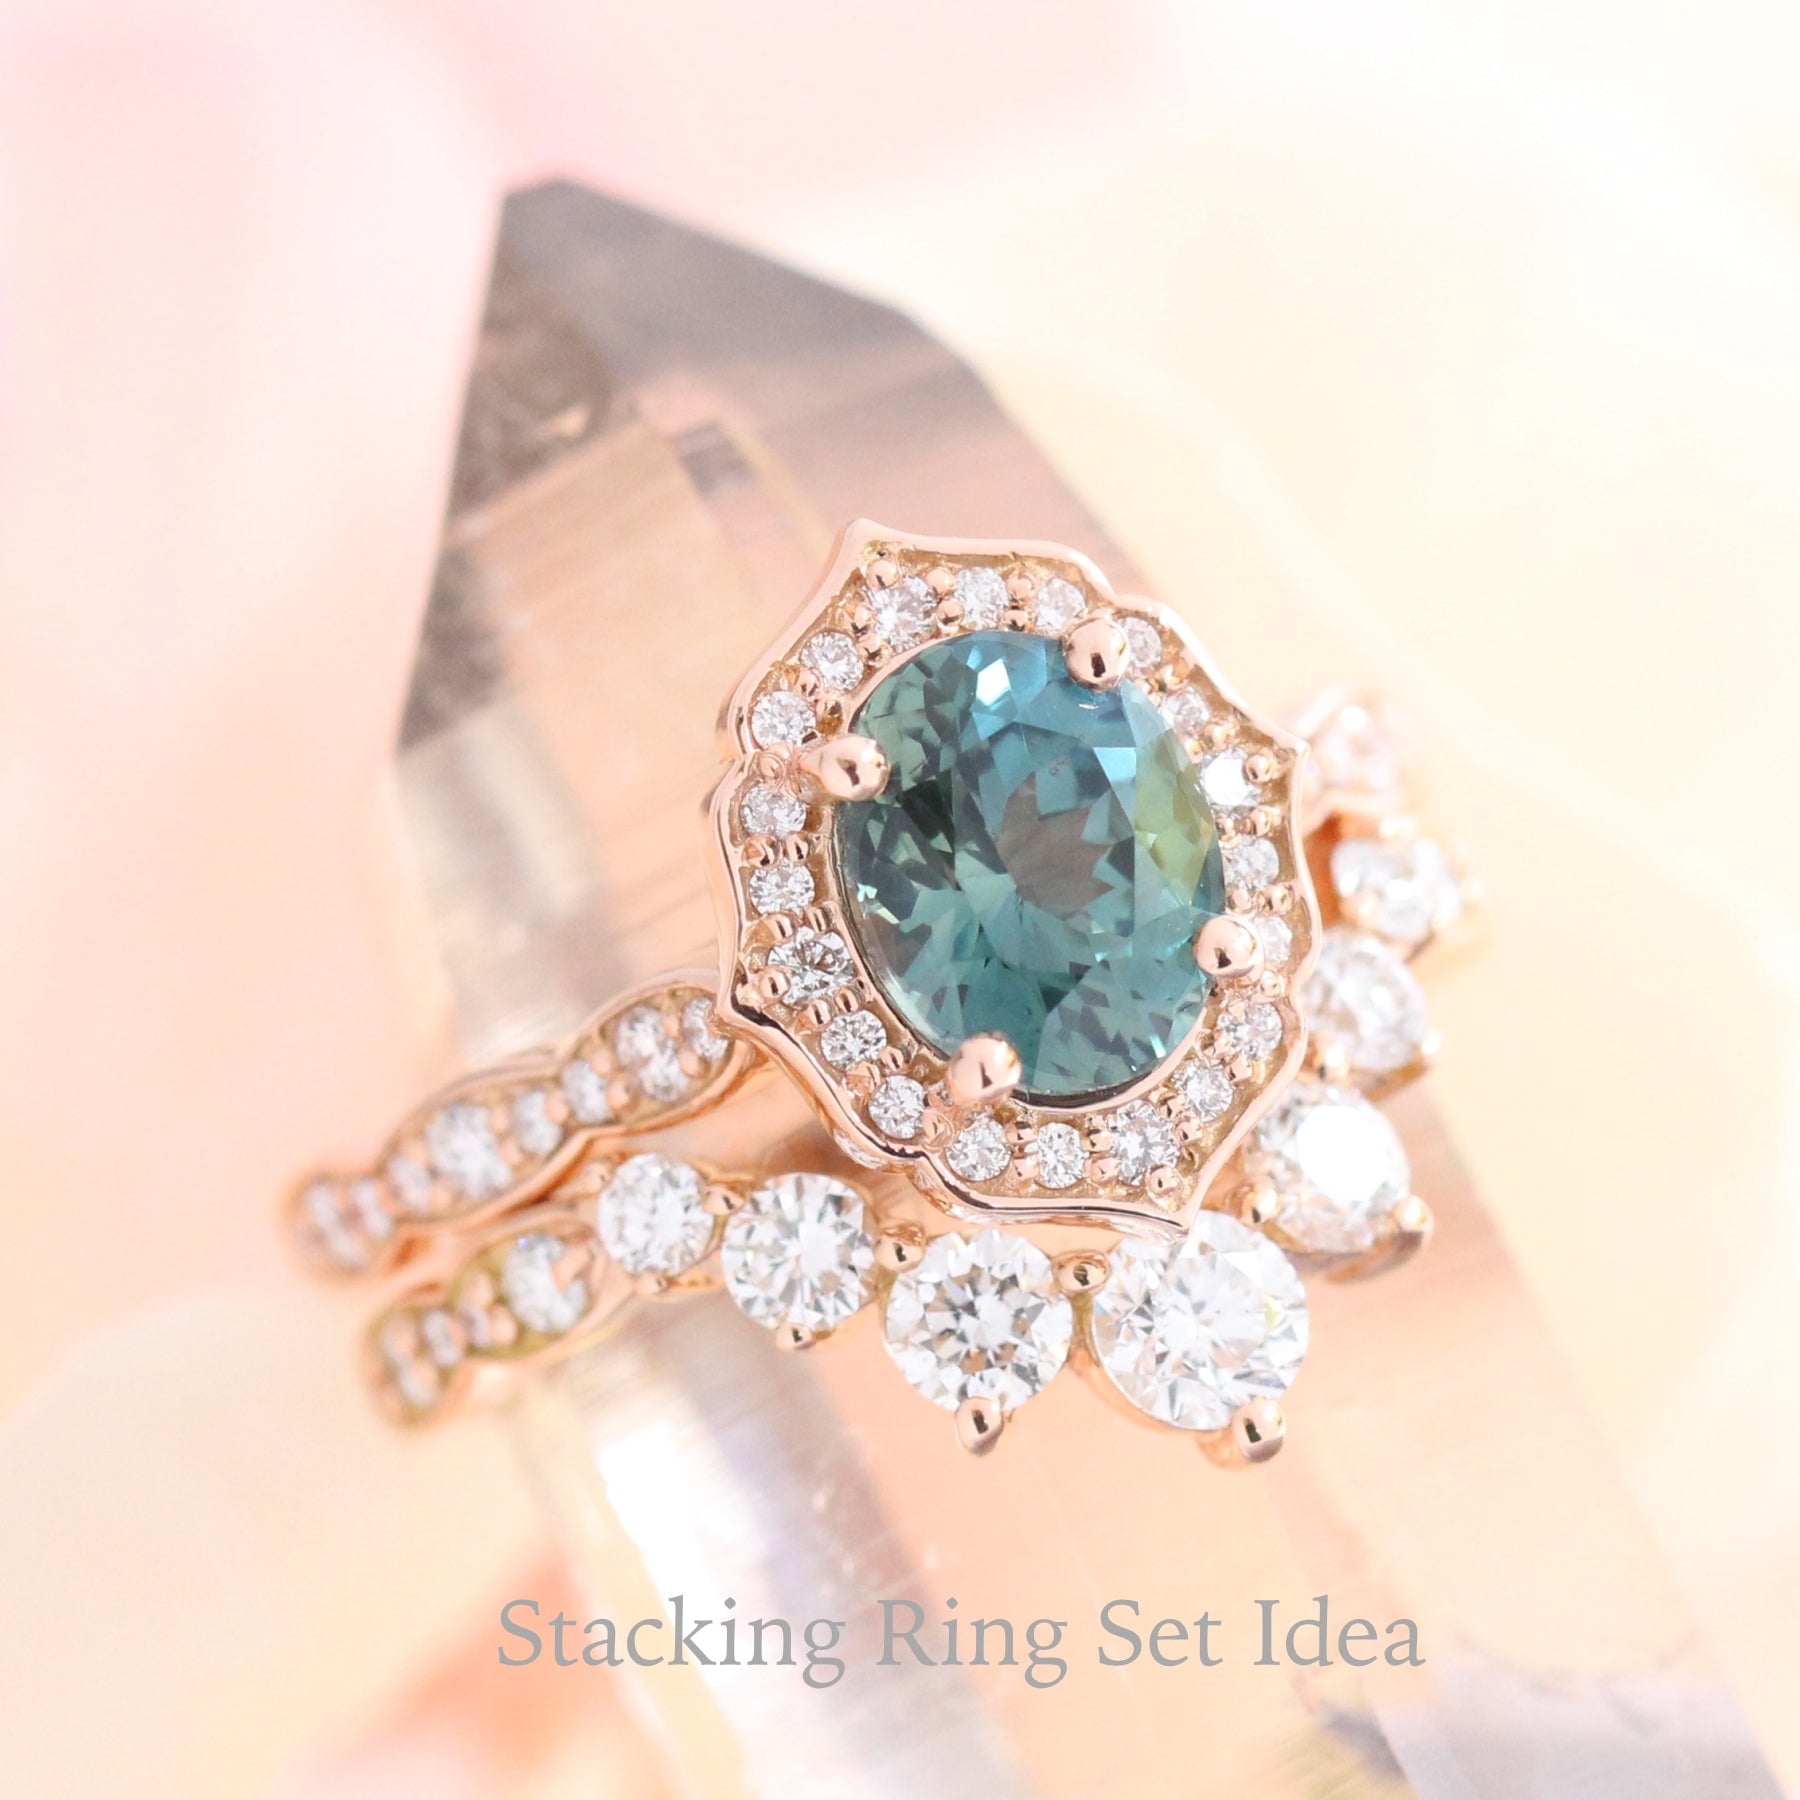 Teal Sapphire Ring Rose Gold Vintage Floral Diamond Engagement Ring La More Design Jewelry